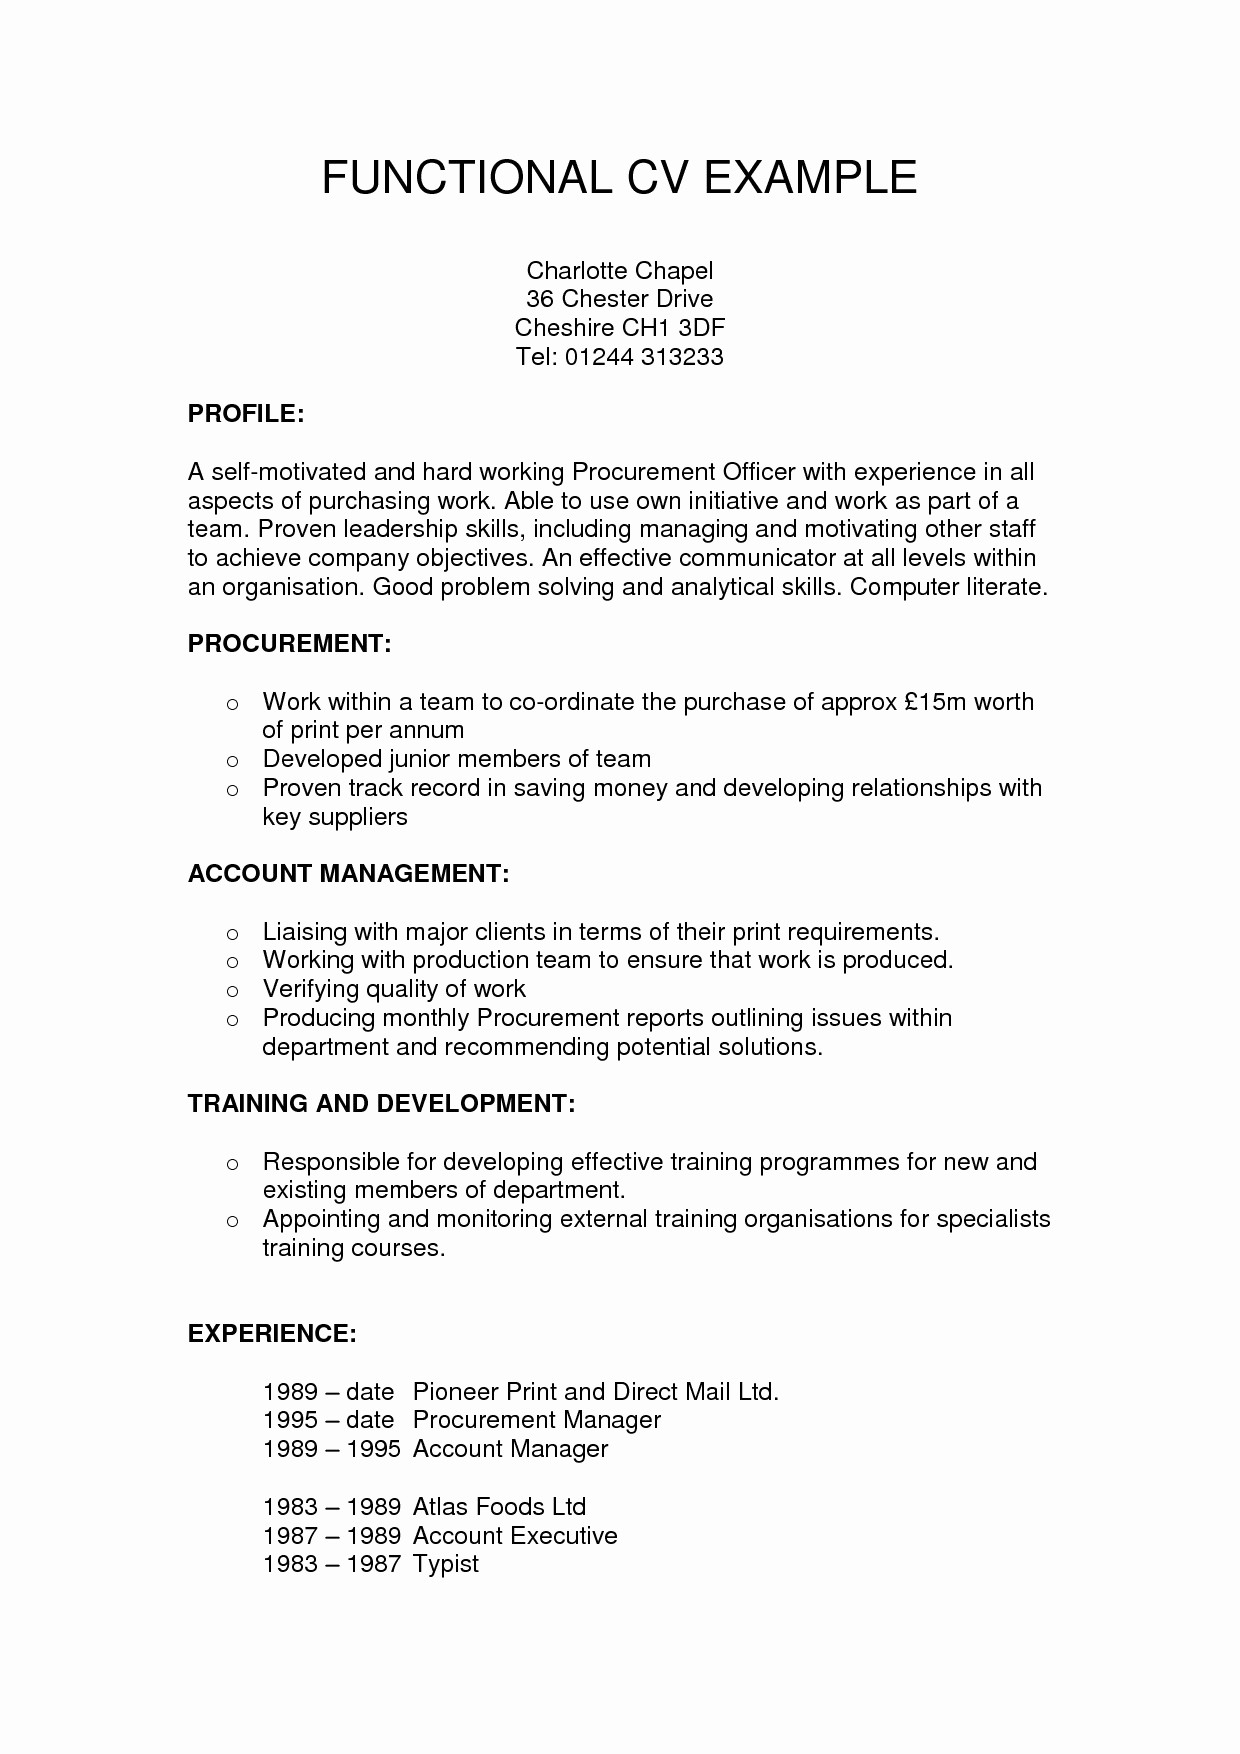 Free Functional Resume Template 2018 Best Of 41 Good Functional Resume Template 2018 Xb E